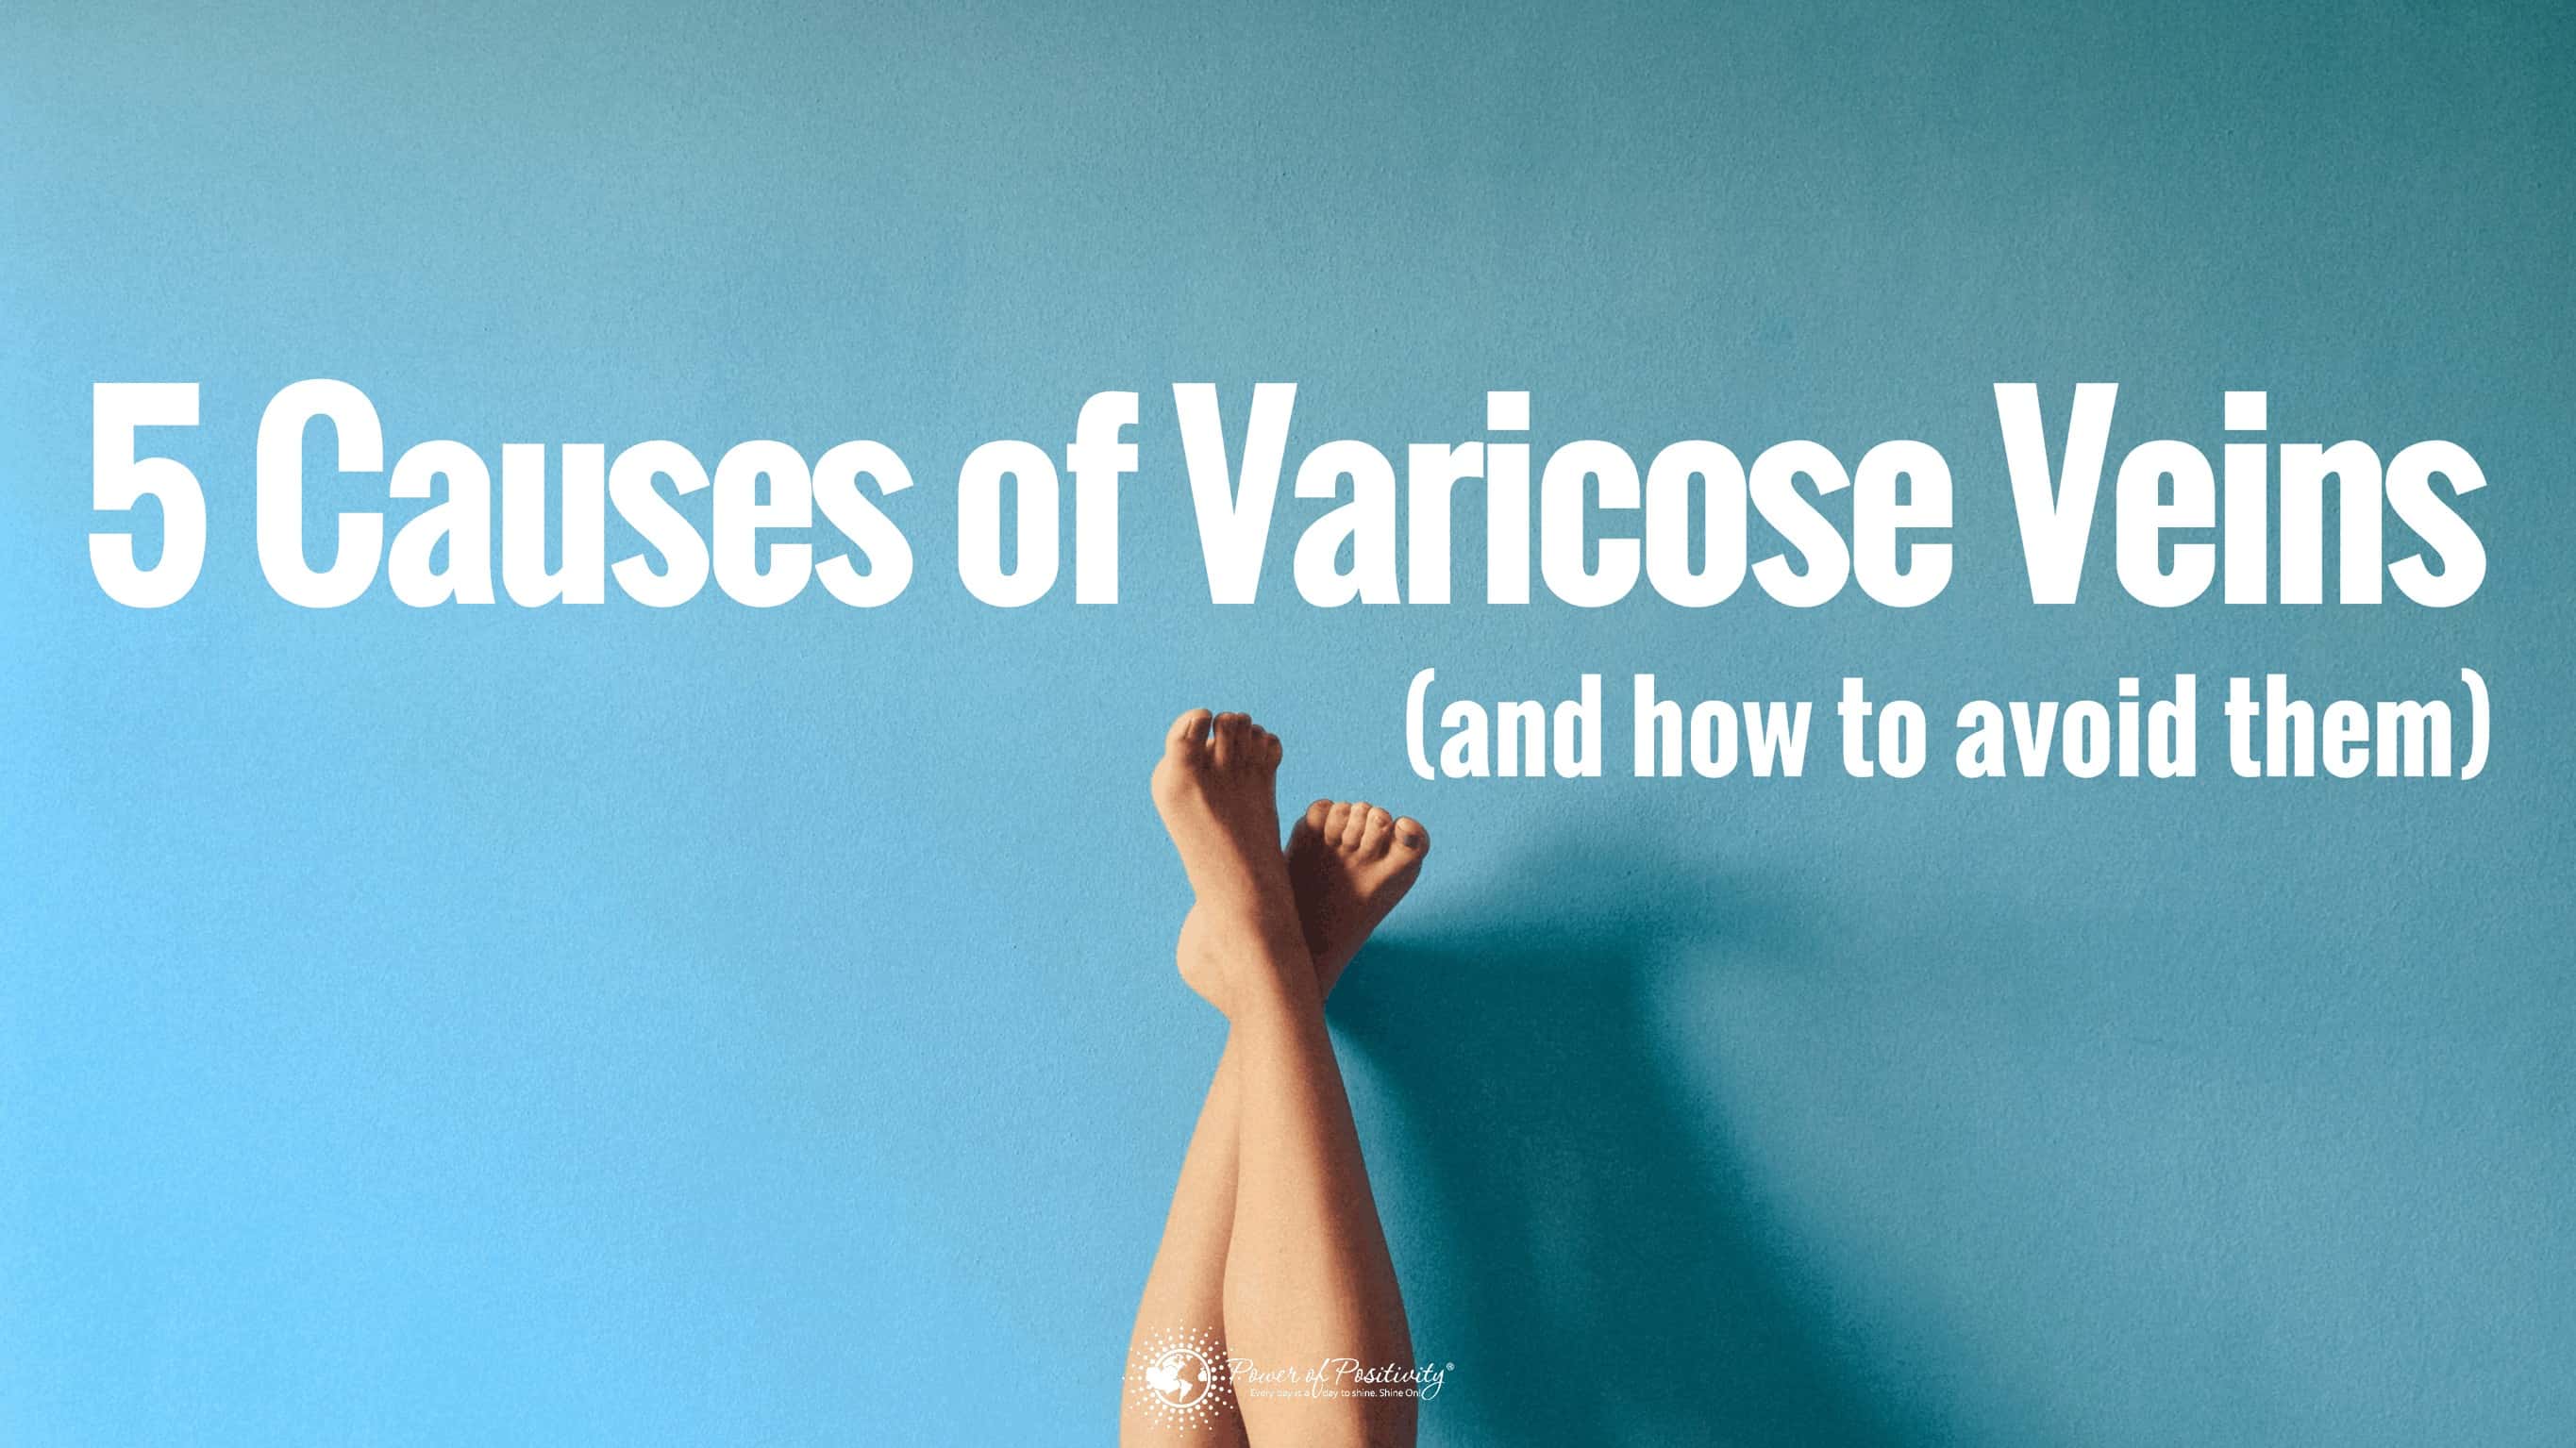 5 Causes of Varicose Veins (And How to Avoid Them)